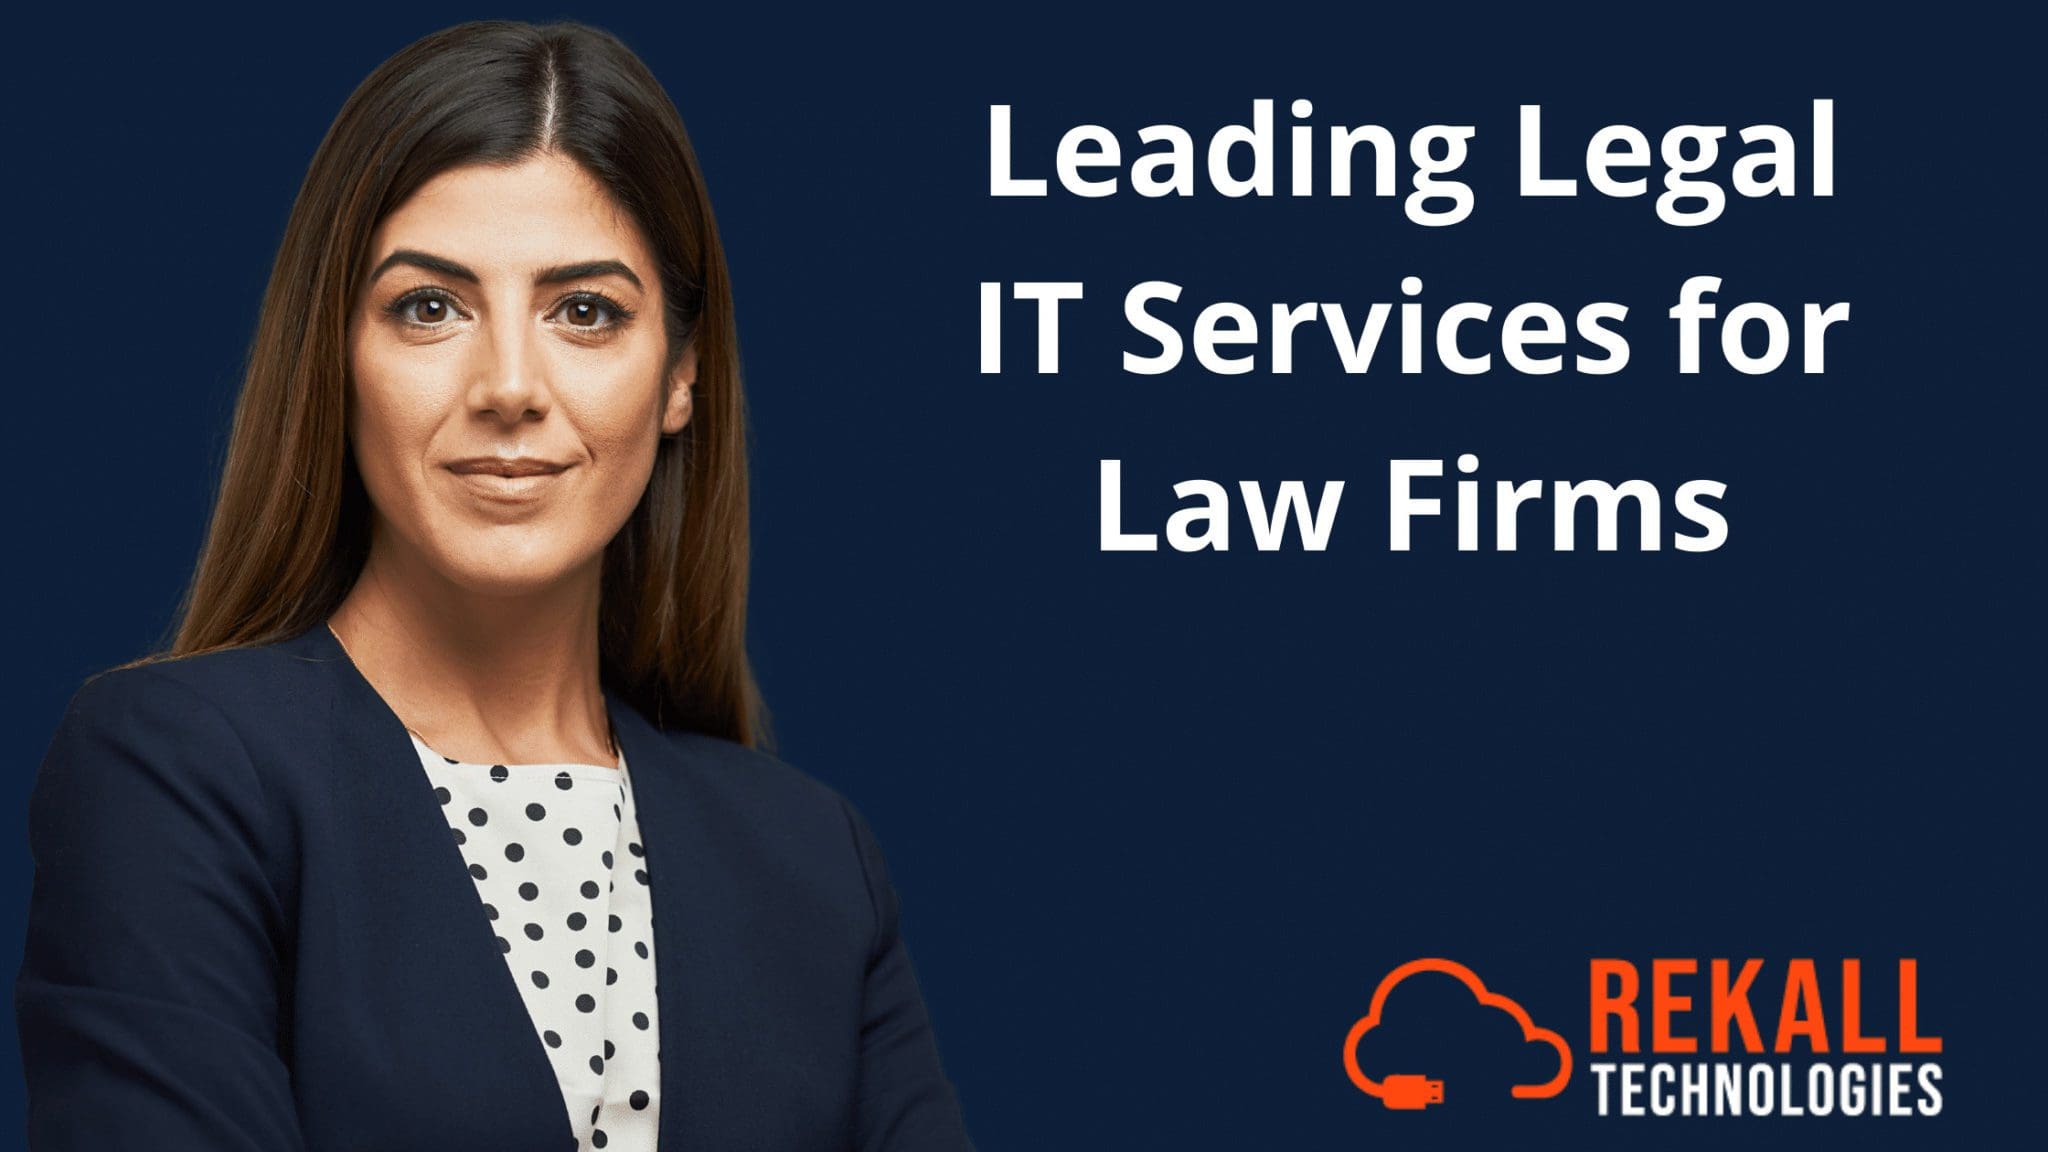 Leading Legal IT Services for Law Firms